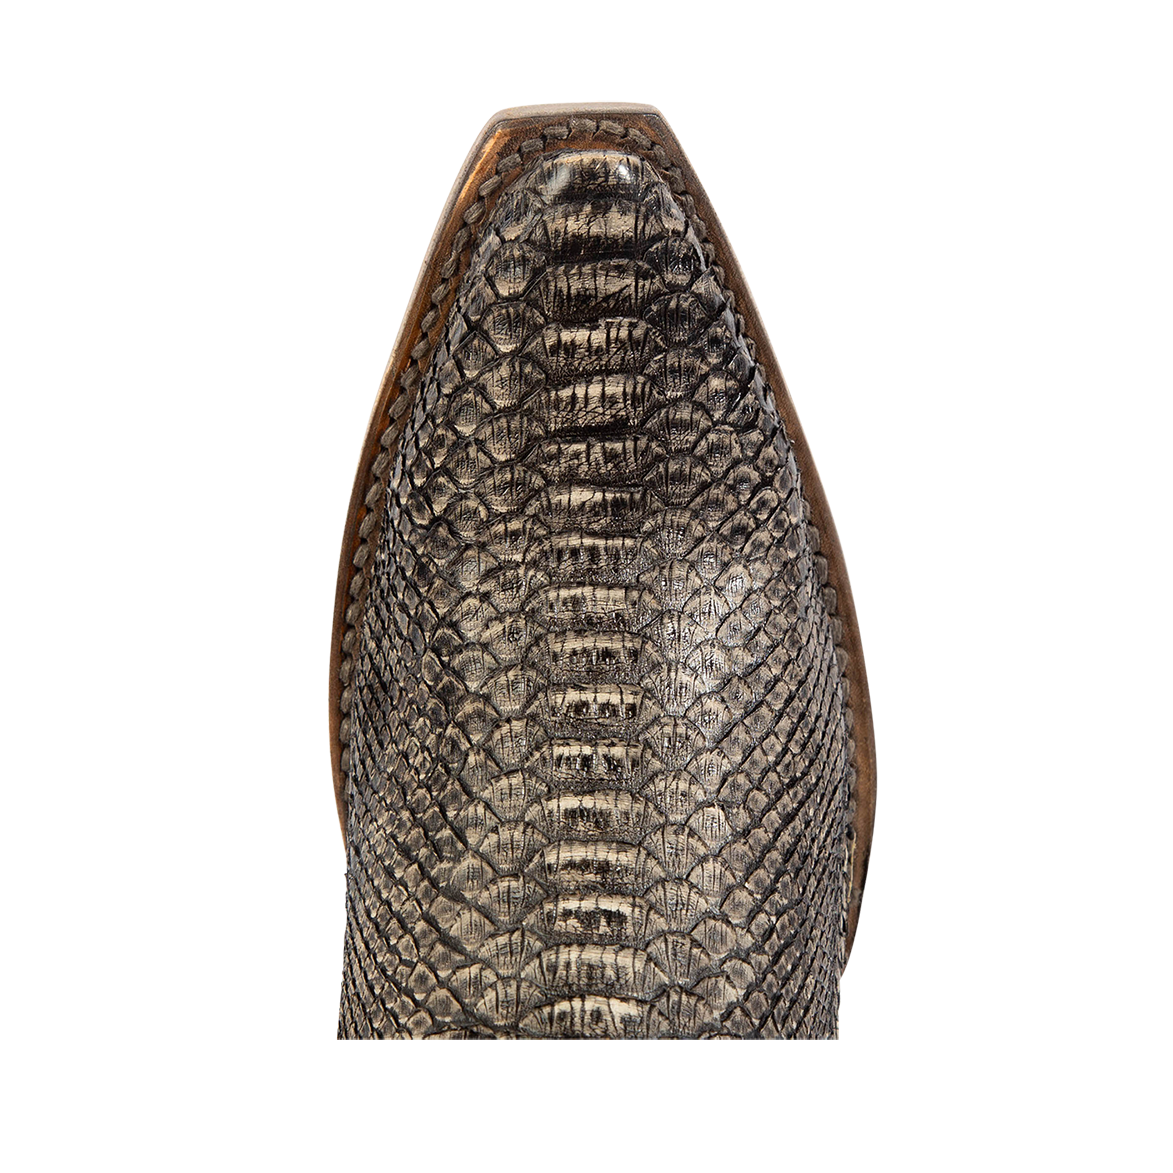 Top view showing snip toe construction with stitch detailing on FREEBIRD women's Woodland grey python multi leather boot